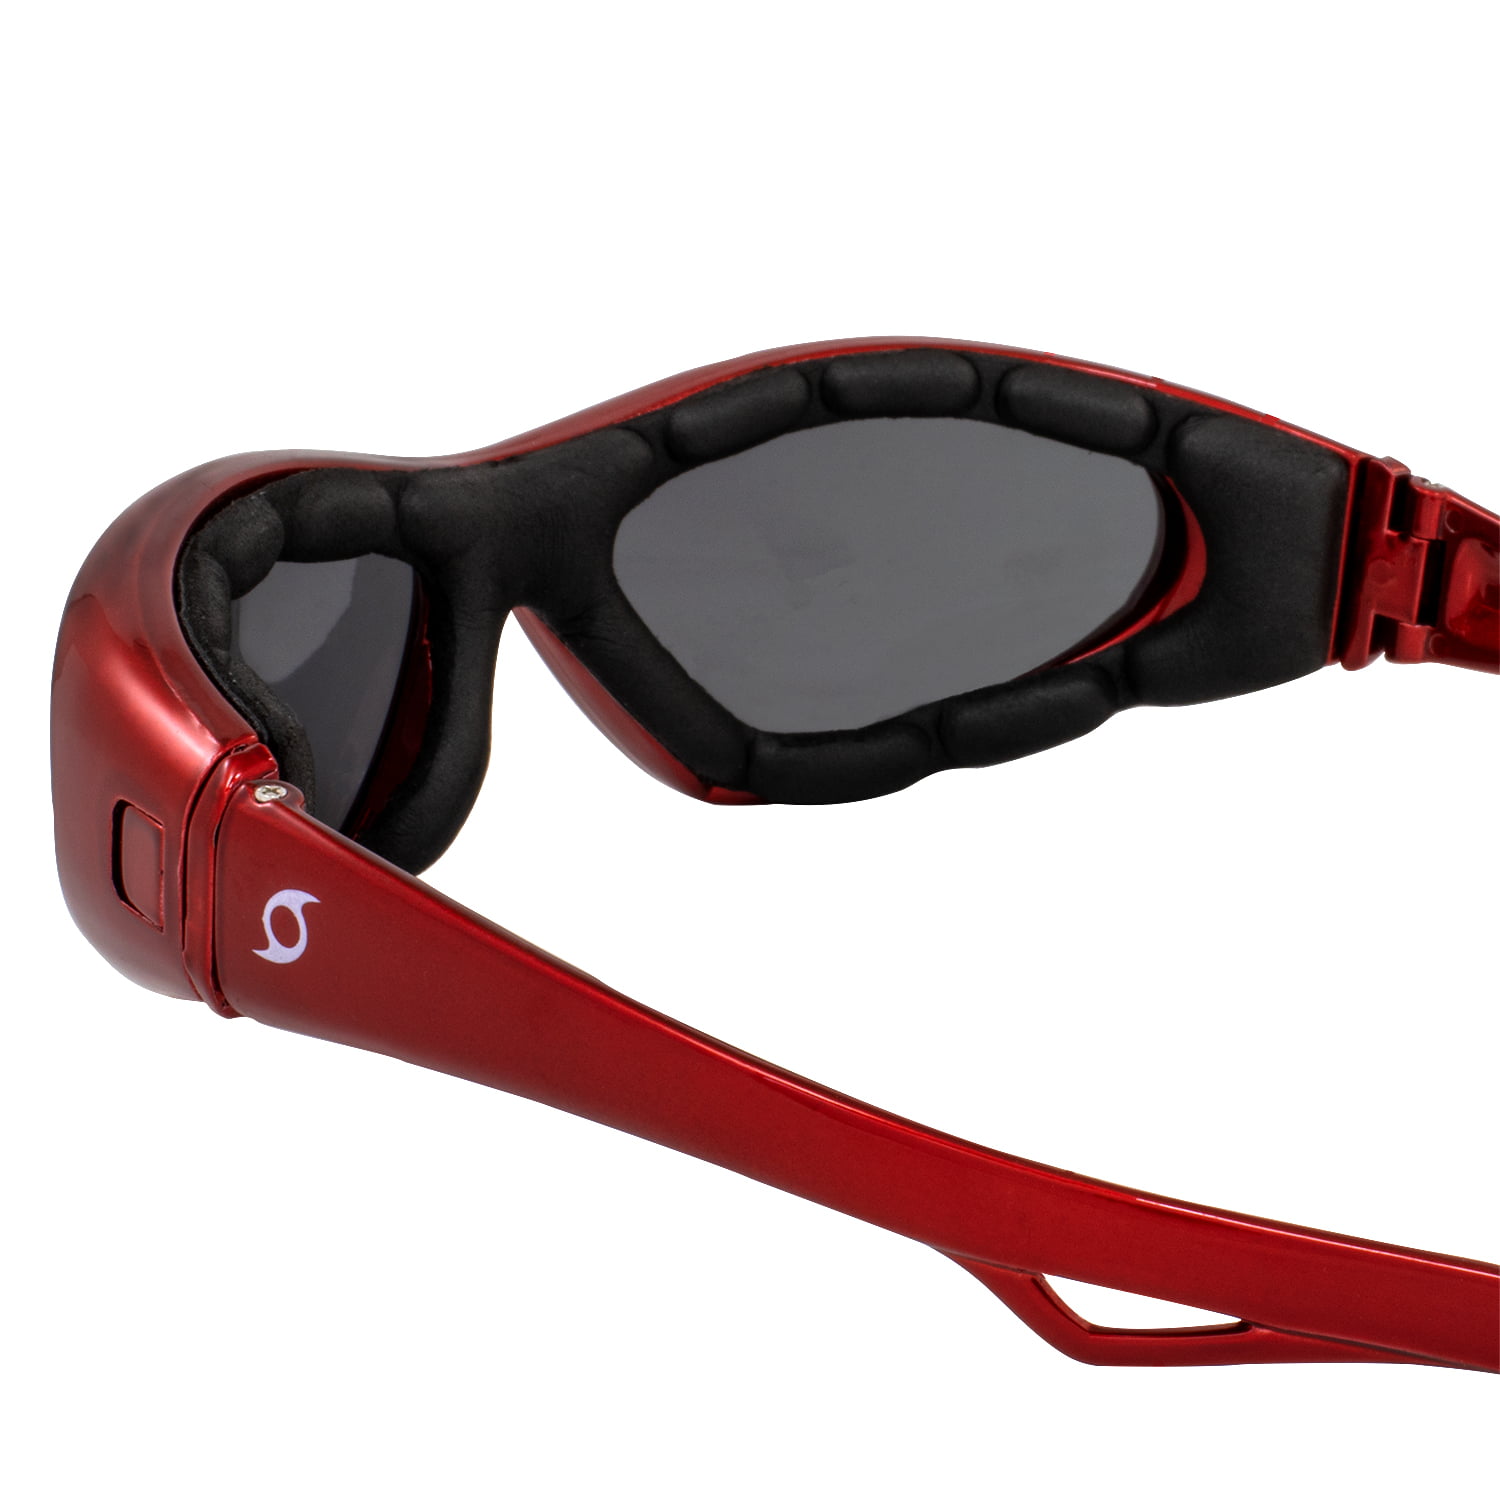 Hurricane Category-5 Jet Ski Water-Sport Floating Red Goggles Interchangeable Sunglasses to Goggles with Polarized Smoke Lens 